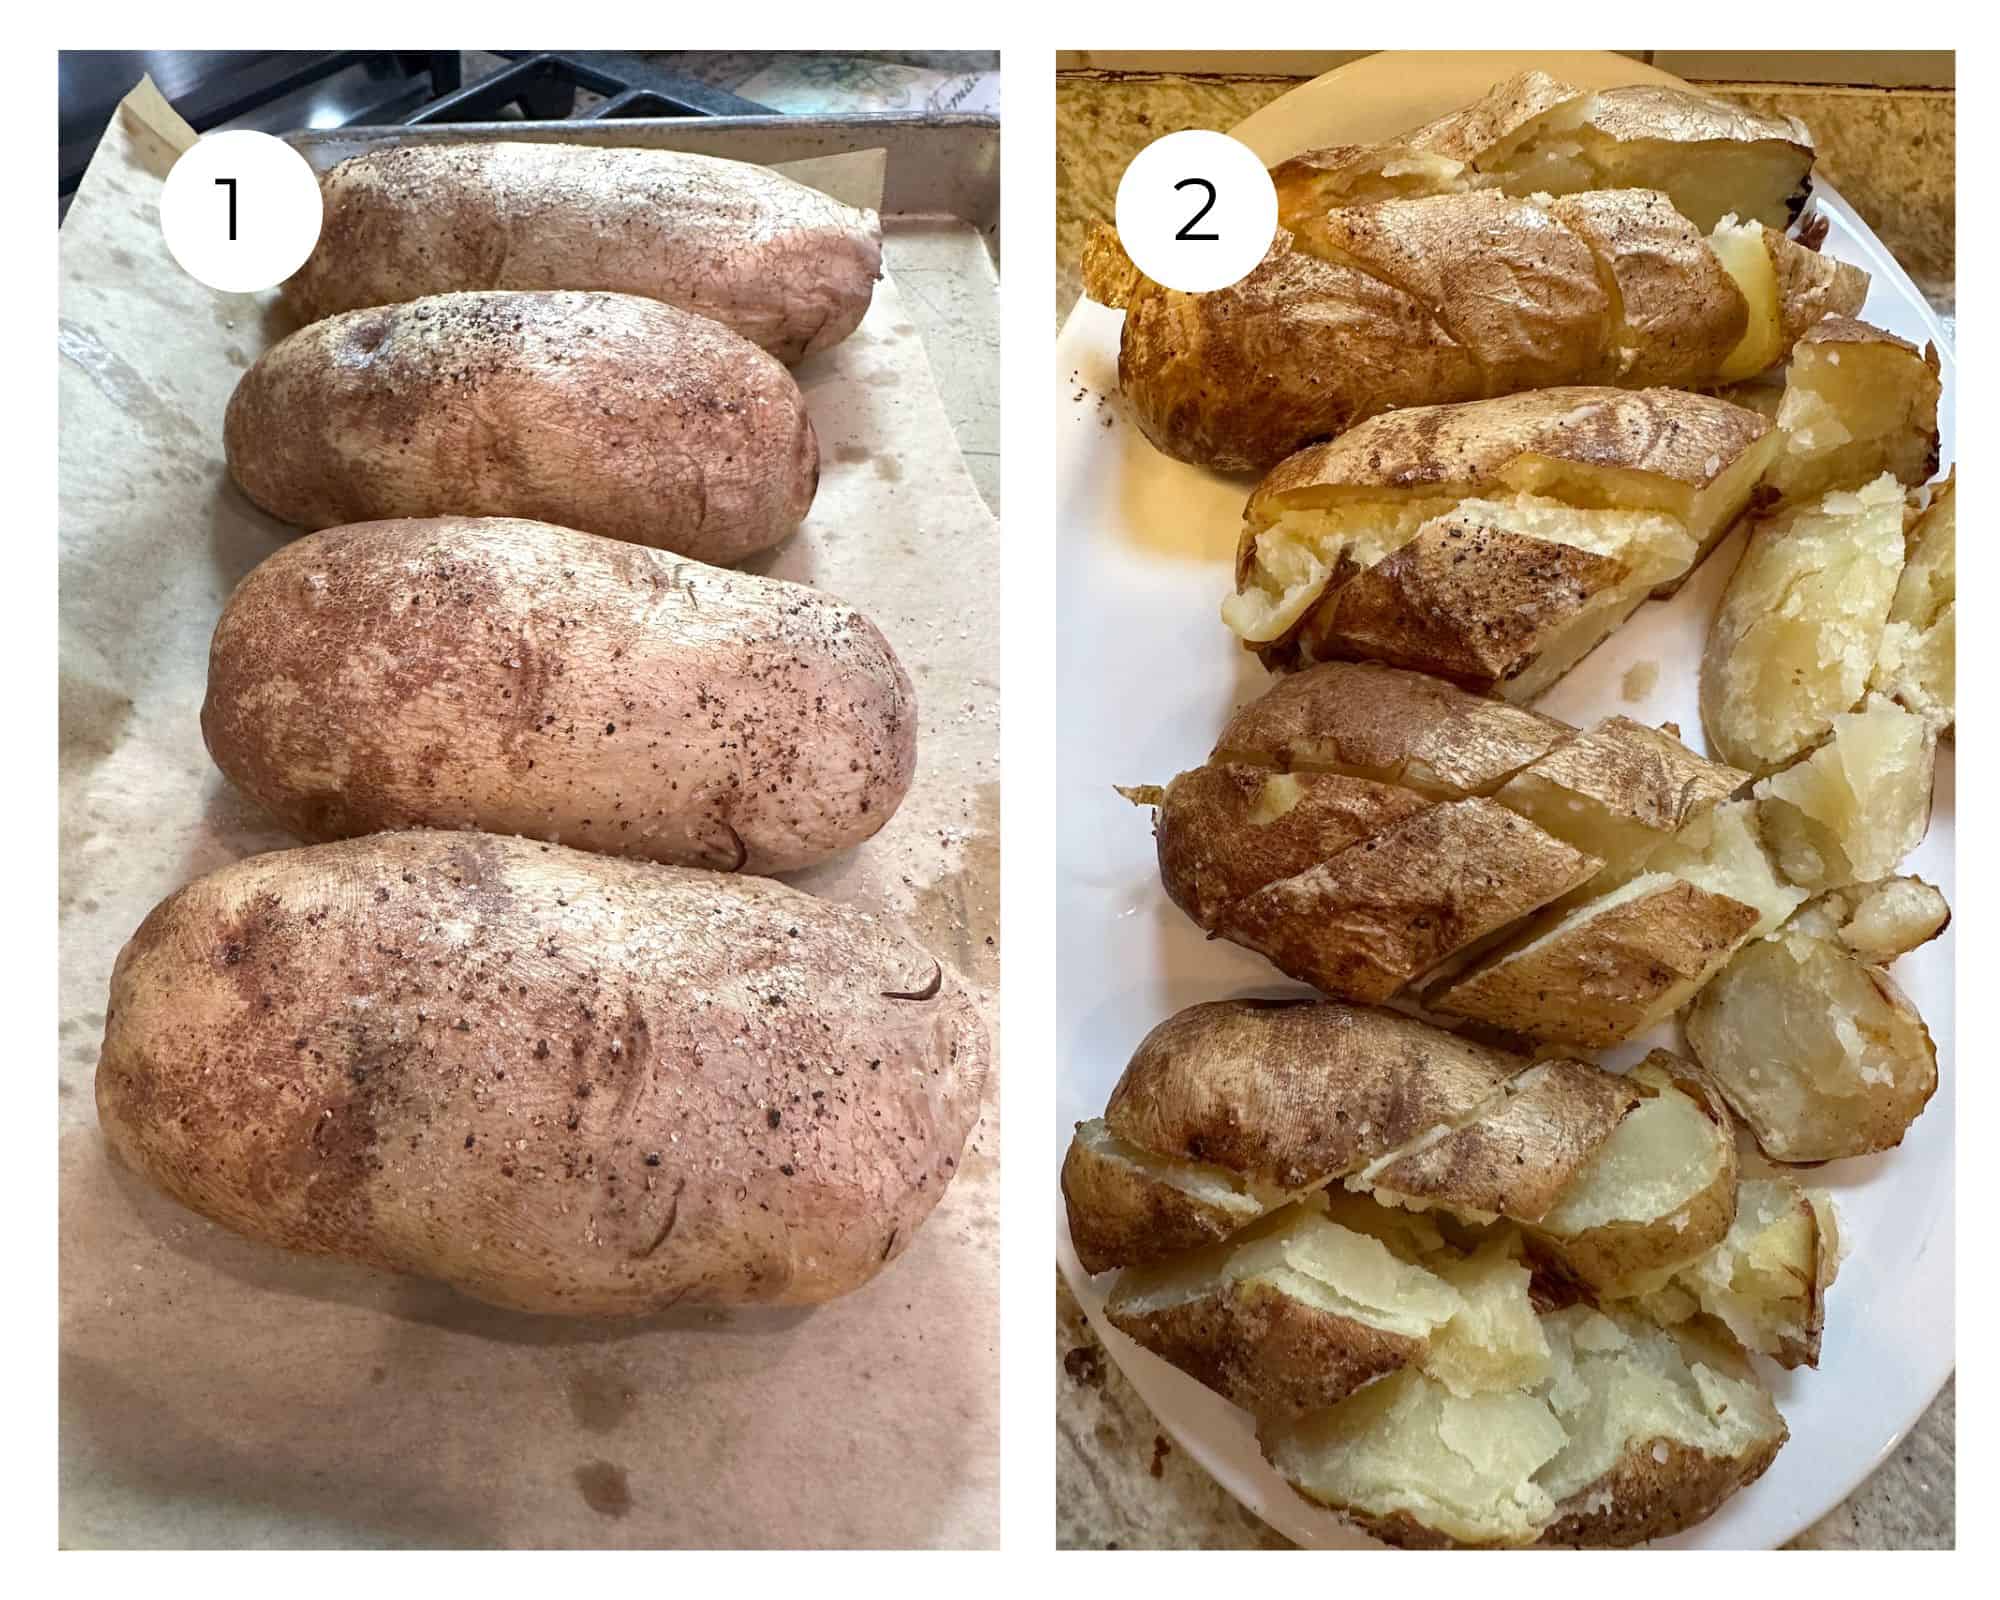 A baking sheet with four baked potatoes, and a plate with the same potatoes sliced into wedges.